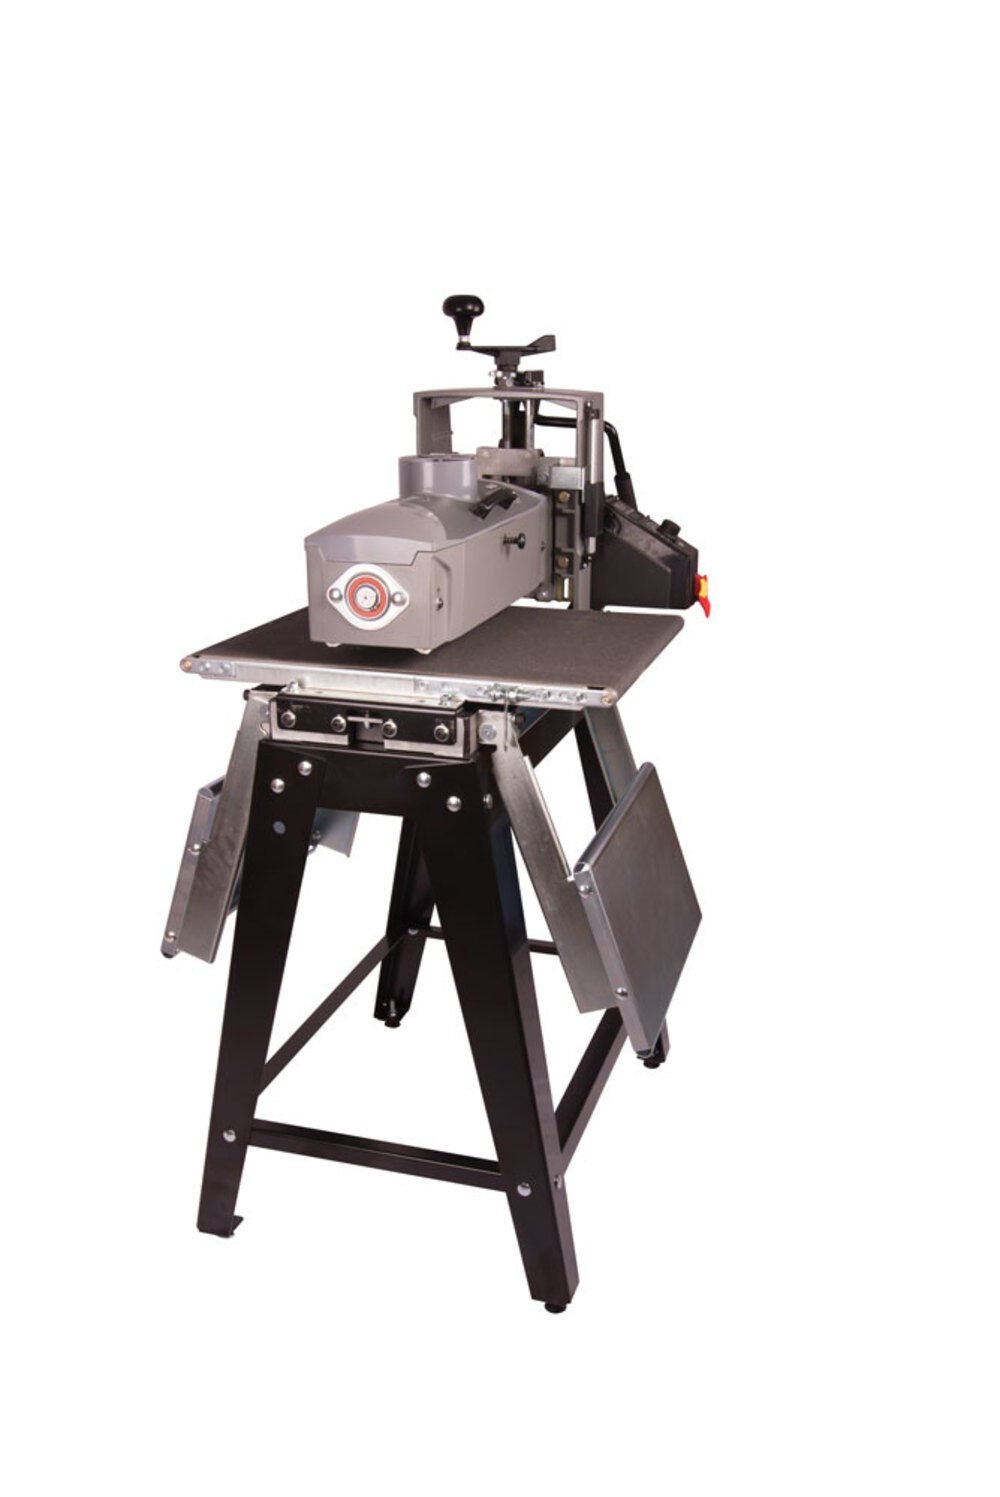 Supermax Tools 16-32 Folding Infeed/Outfeed Tables